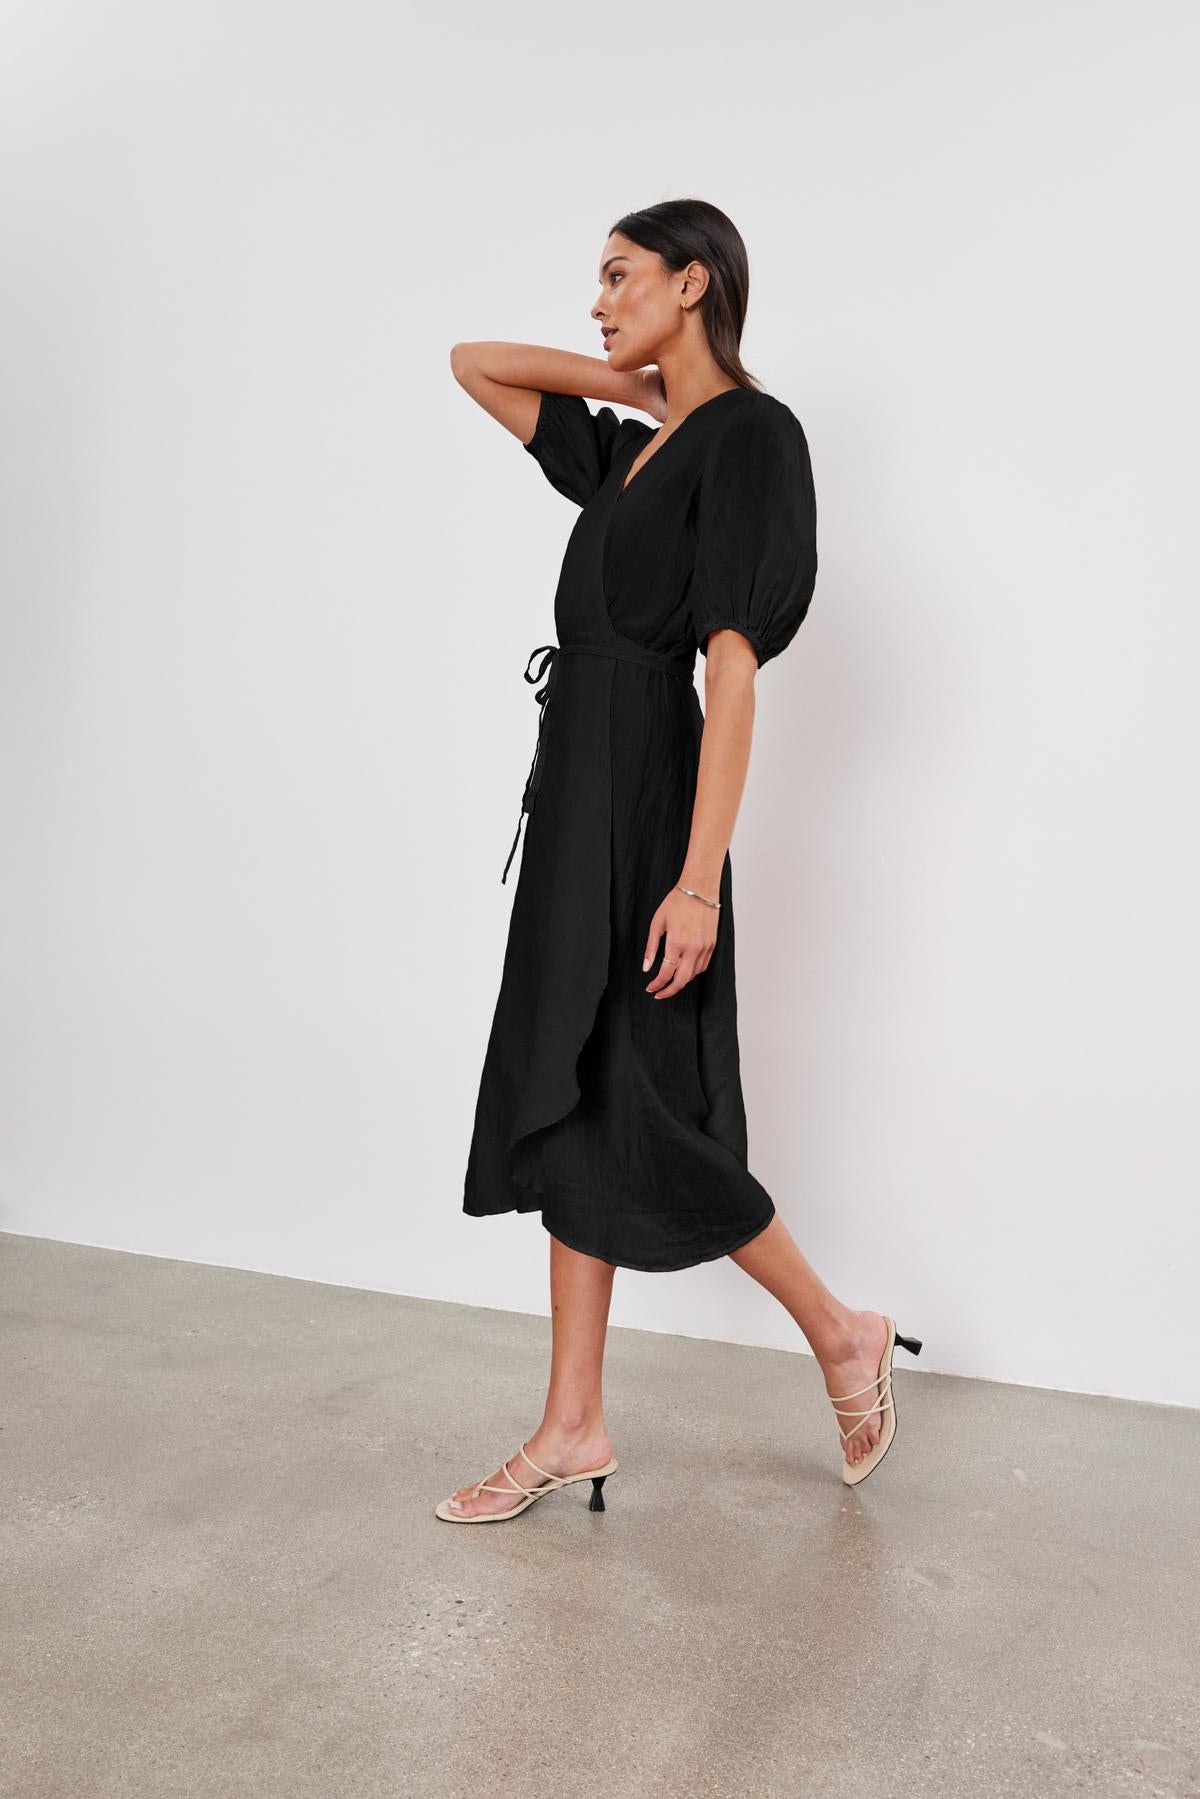 A woman in a black DaLENE LINEN DRESS with puffed sleeves walks in a minimalist space, looking to the side, wearing beige heels. Brand name: Velvet by Graham & Spencer-36917058011329